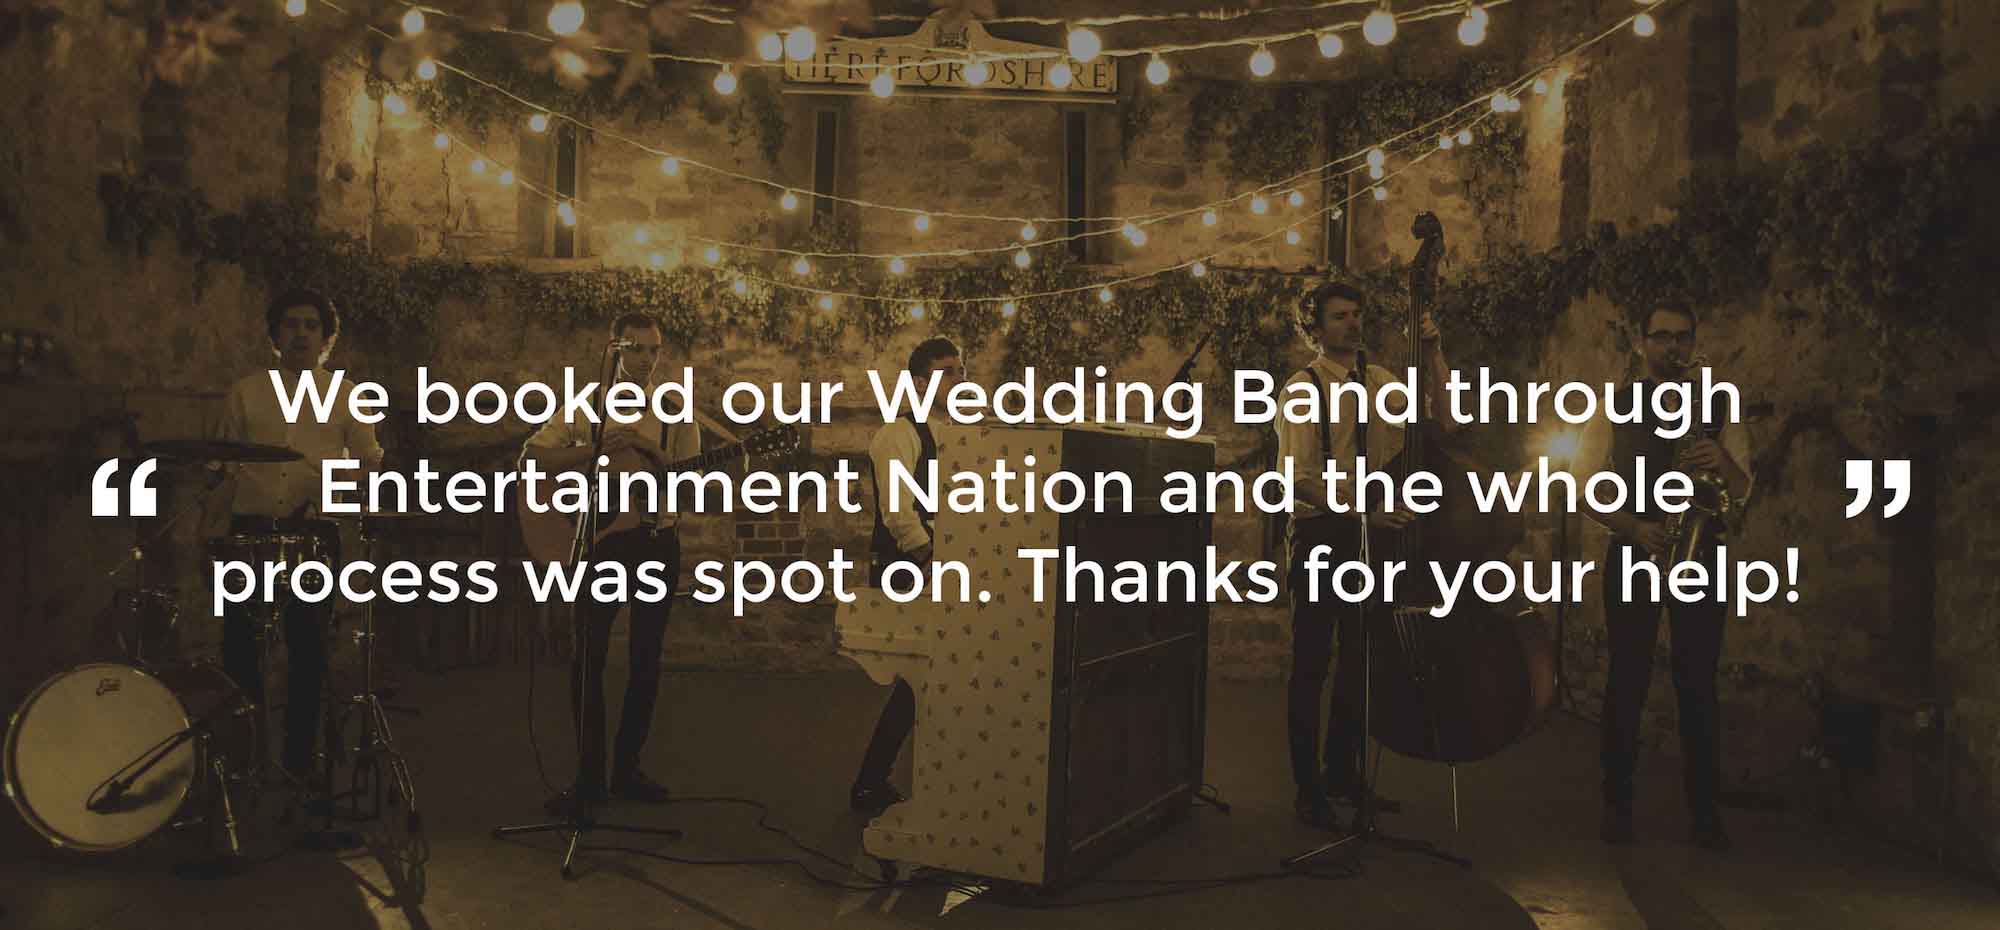 Client Review of a Wedding Band Dorset